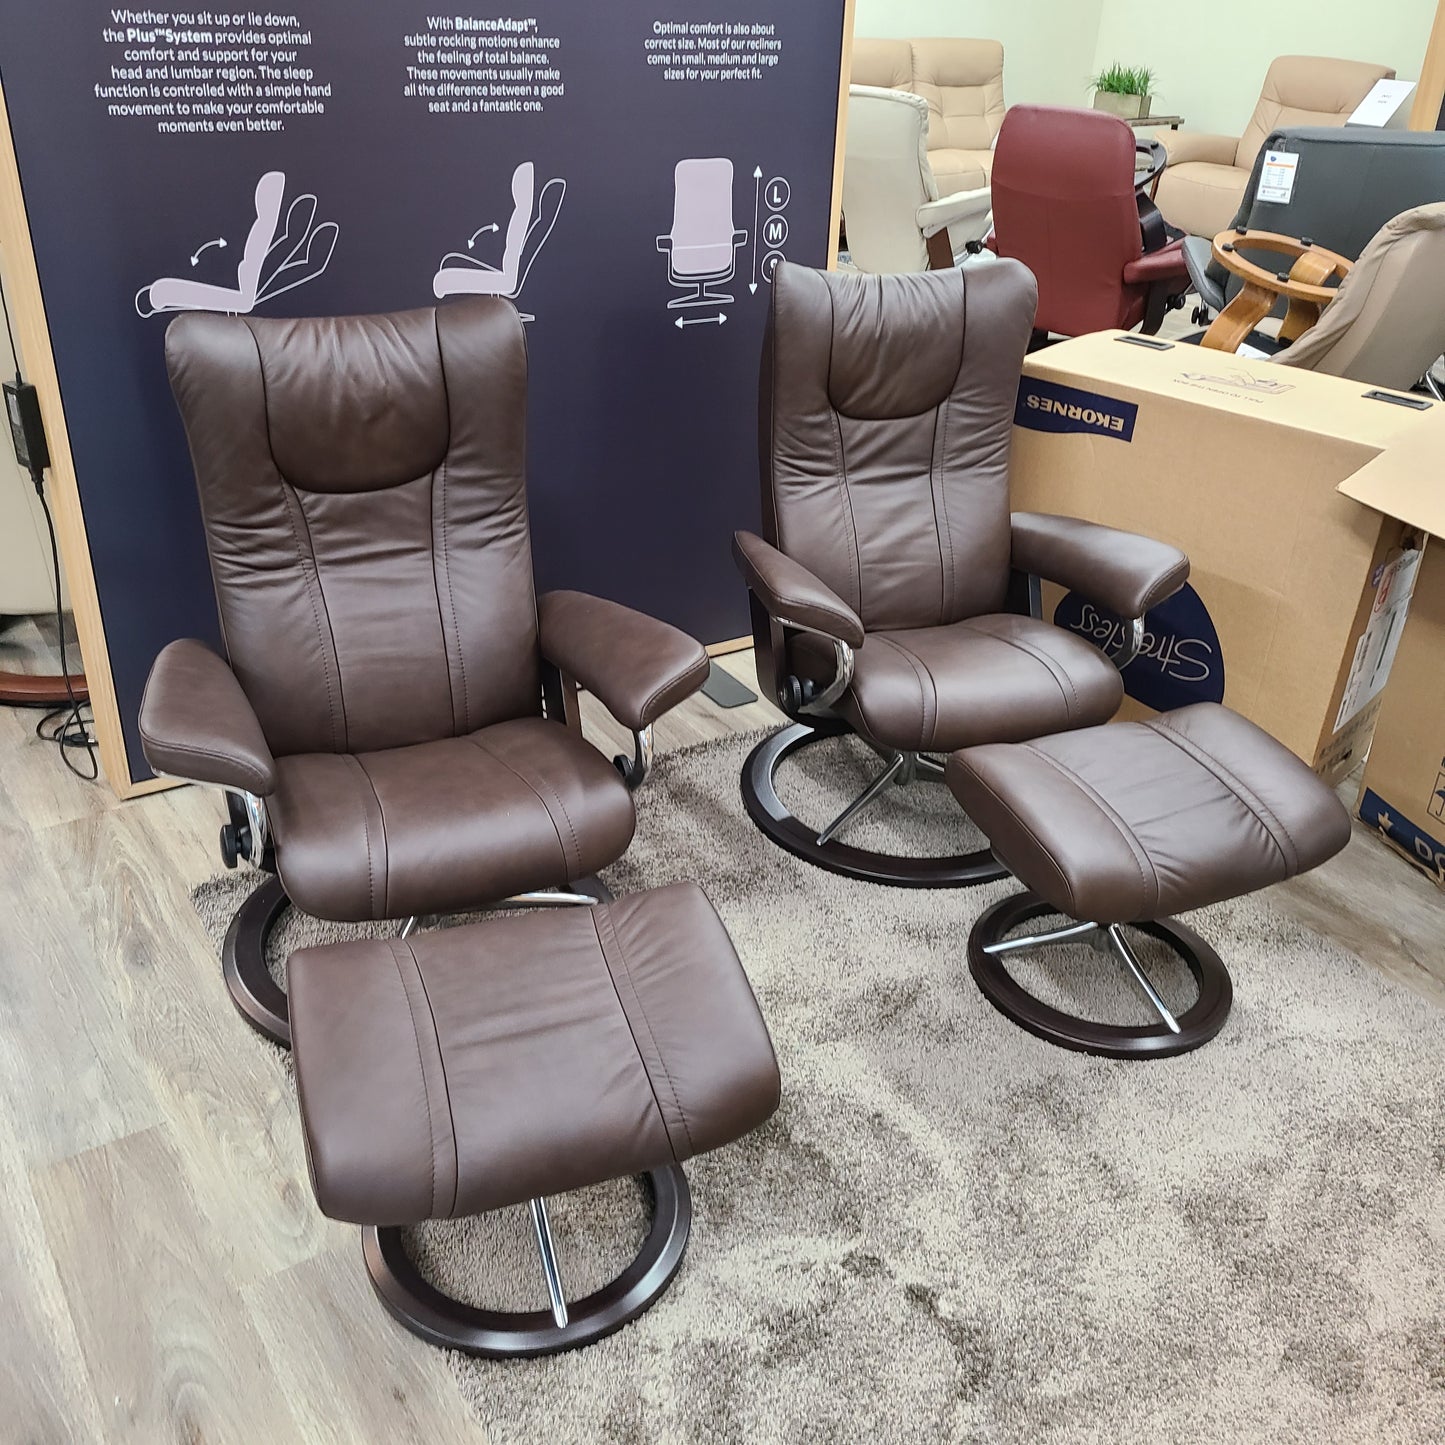 Stressless Wing (Small)